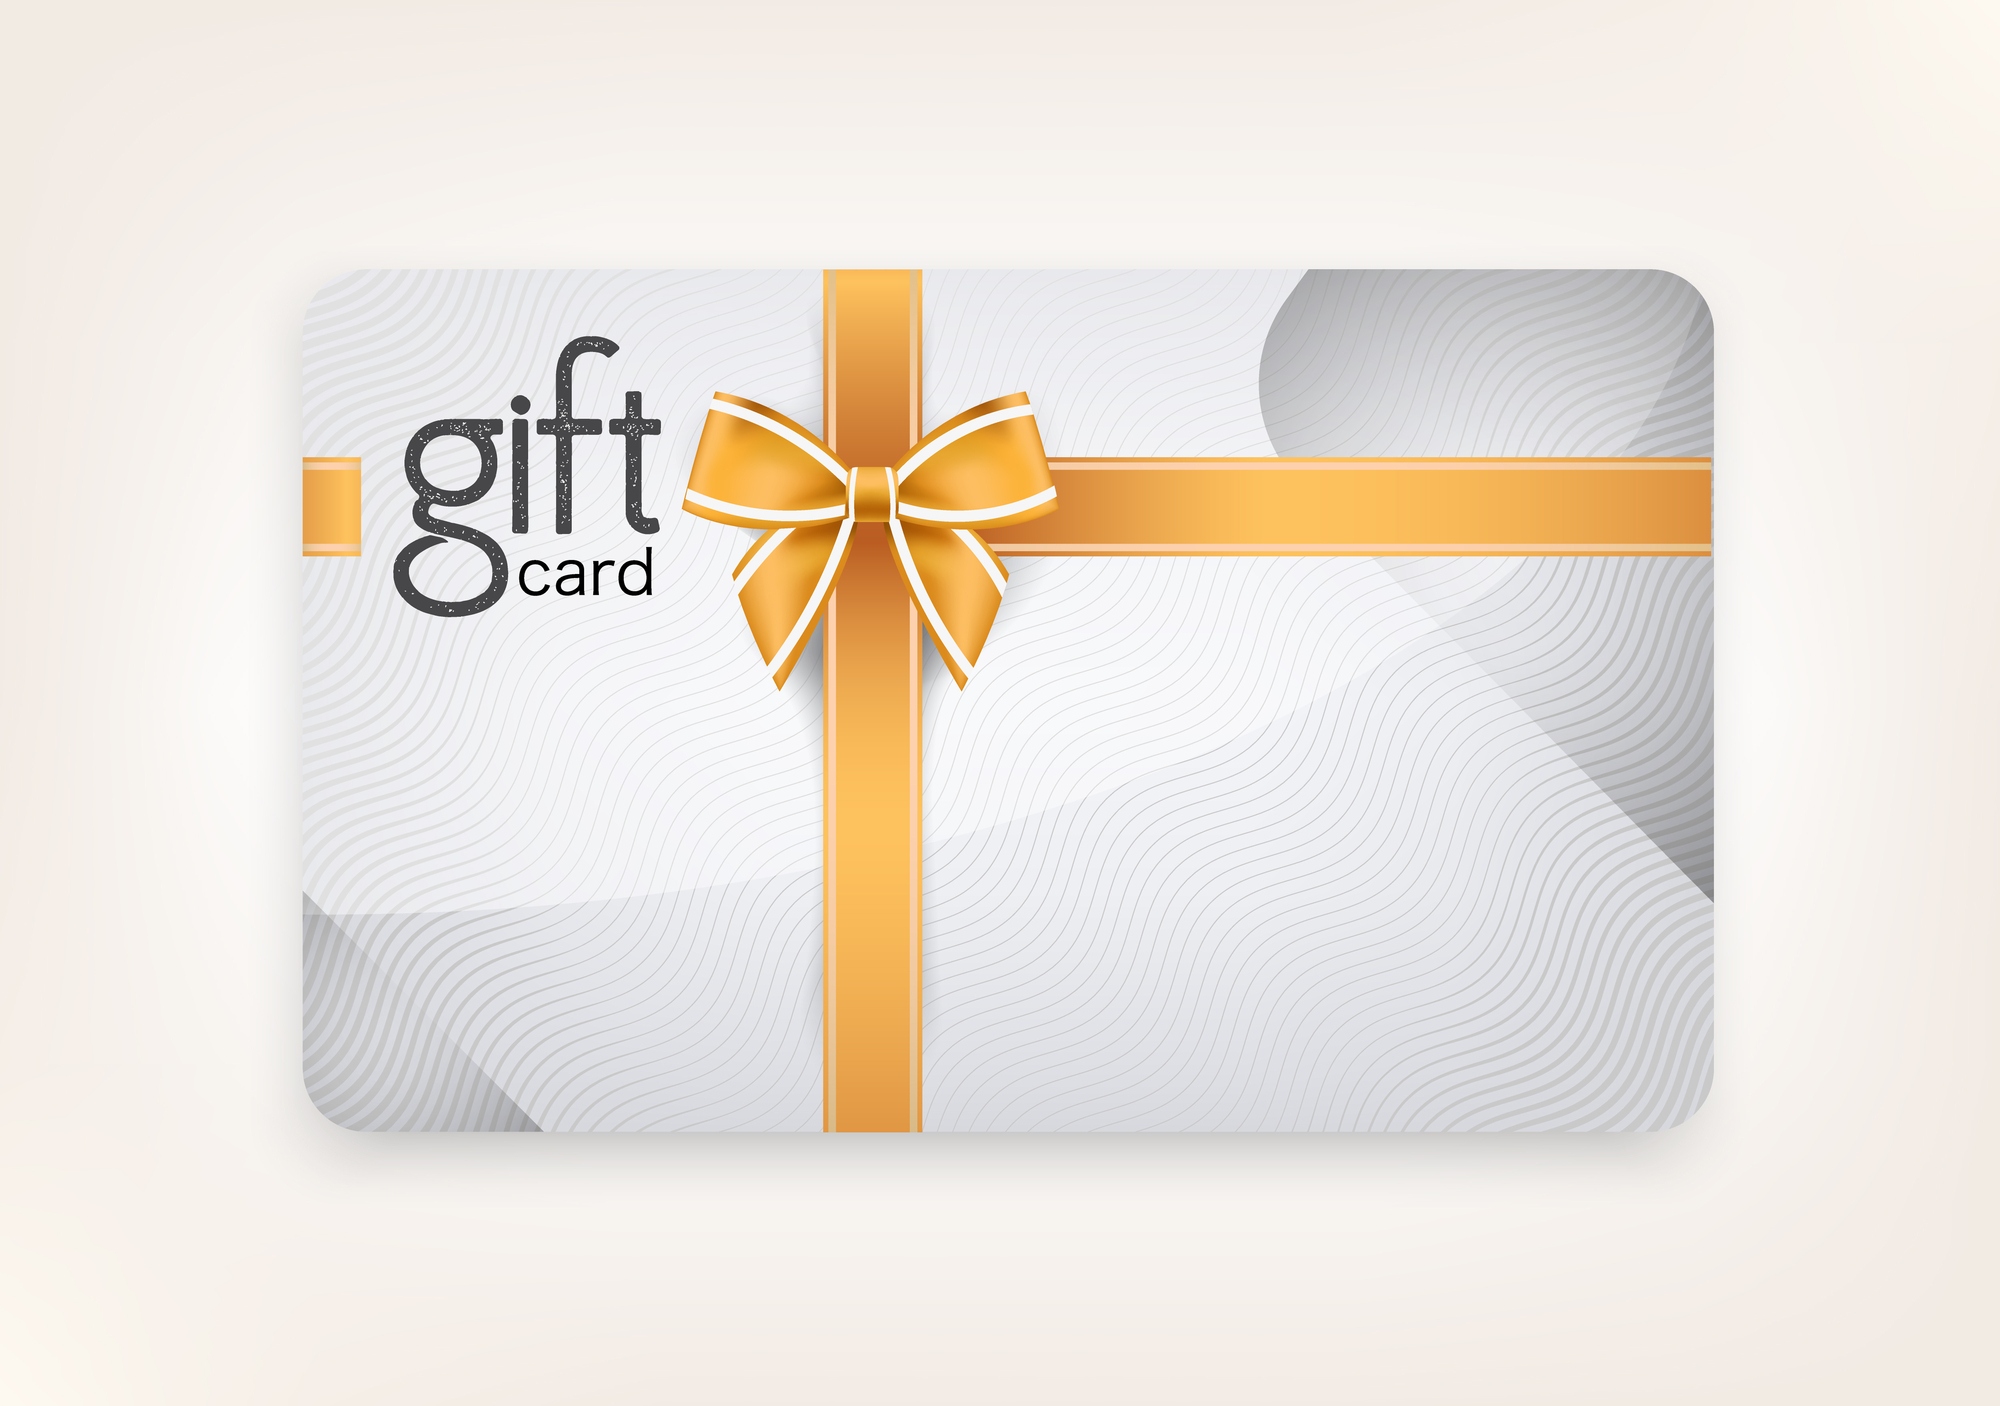 BetterHelp Gift Card (How to Get One) Psych Times